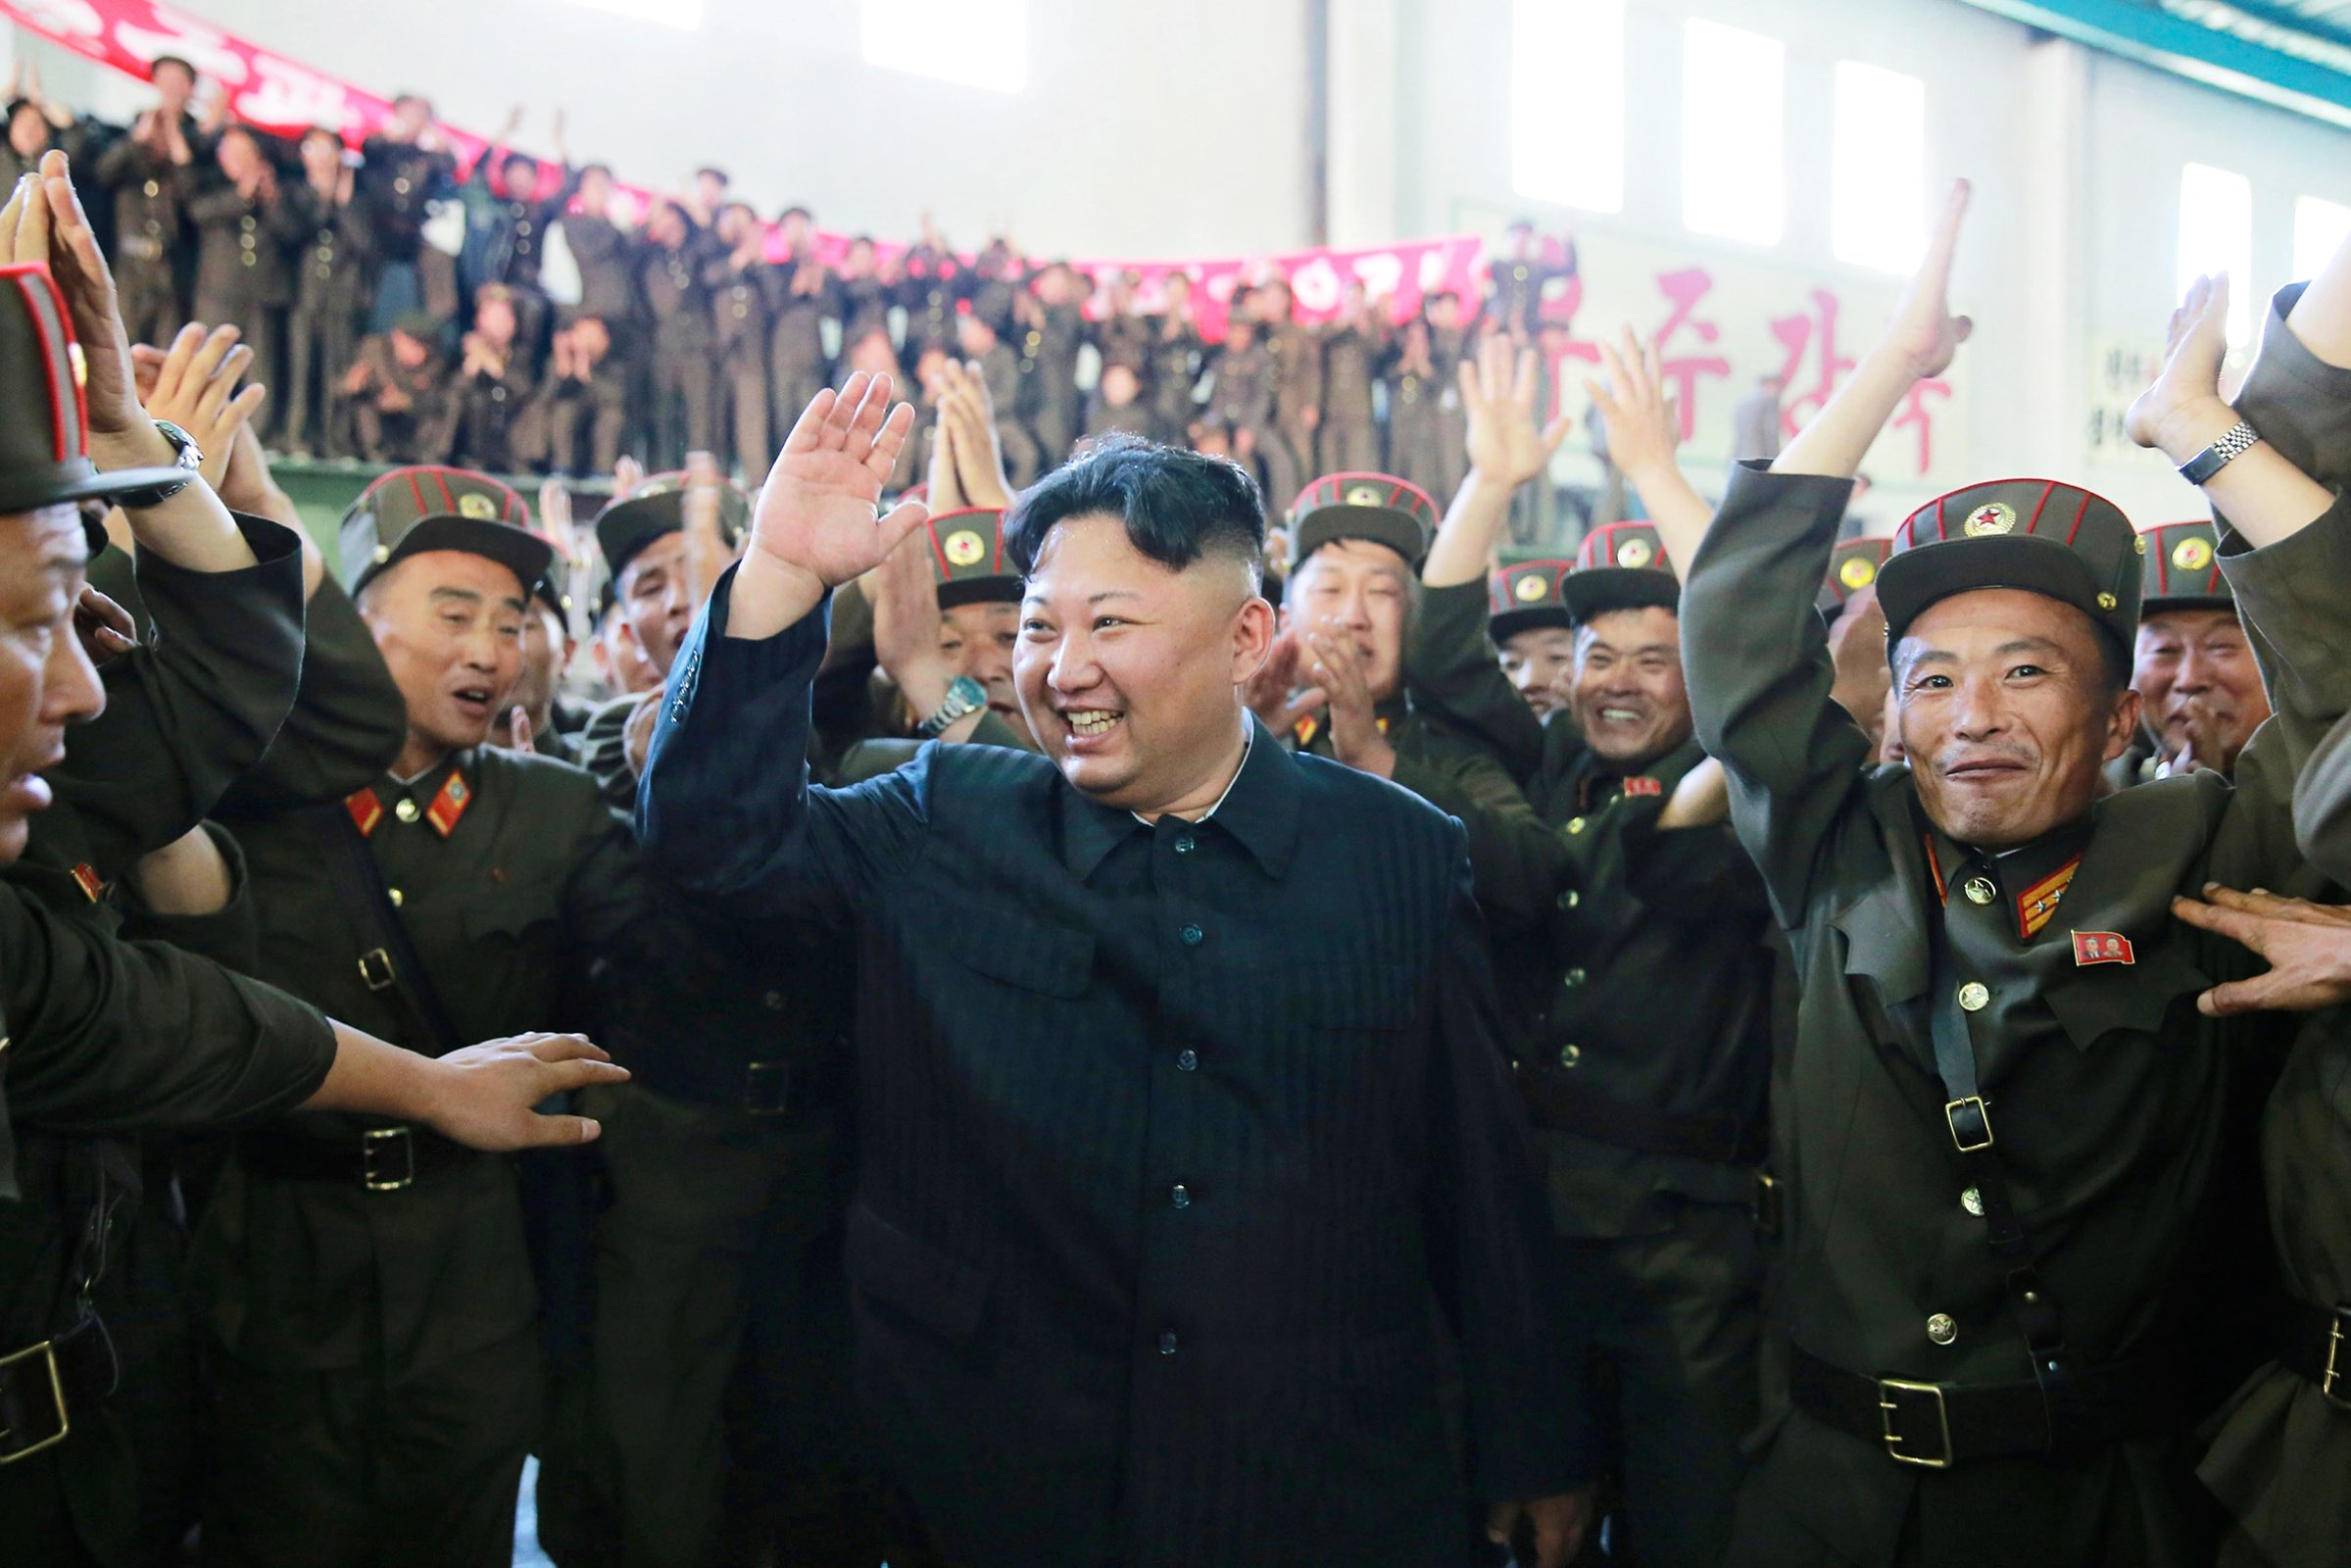 Kim celebrates the test launch of the Hwasong-14 ICBM in this photo released by the North Korean government on July 5